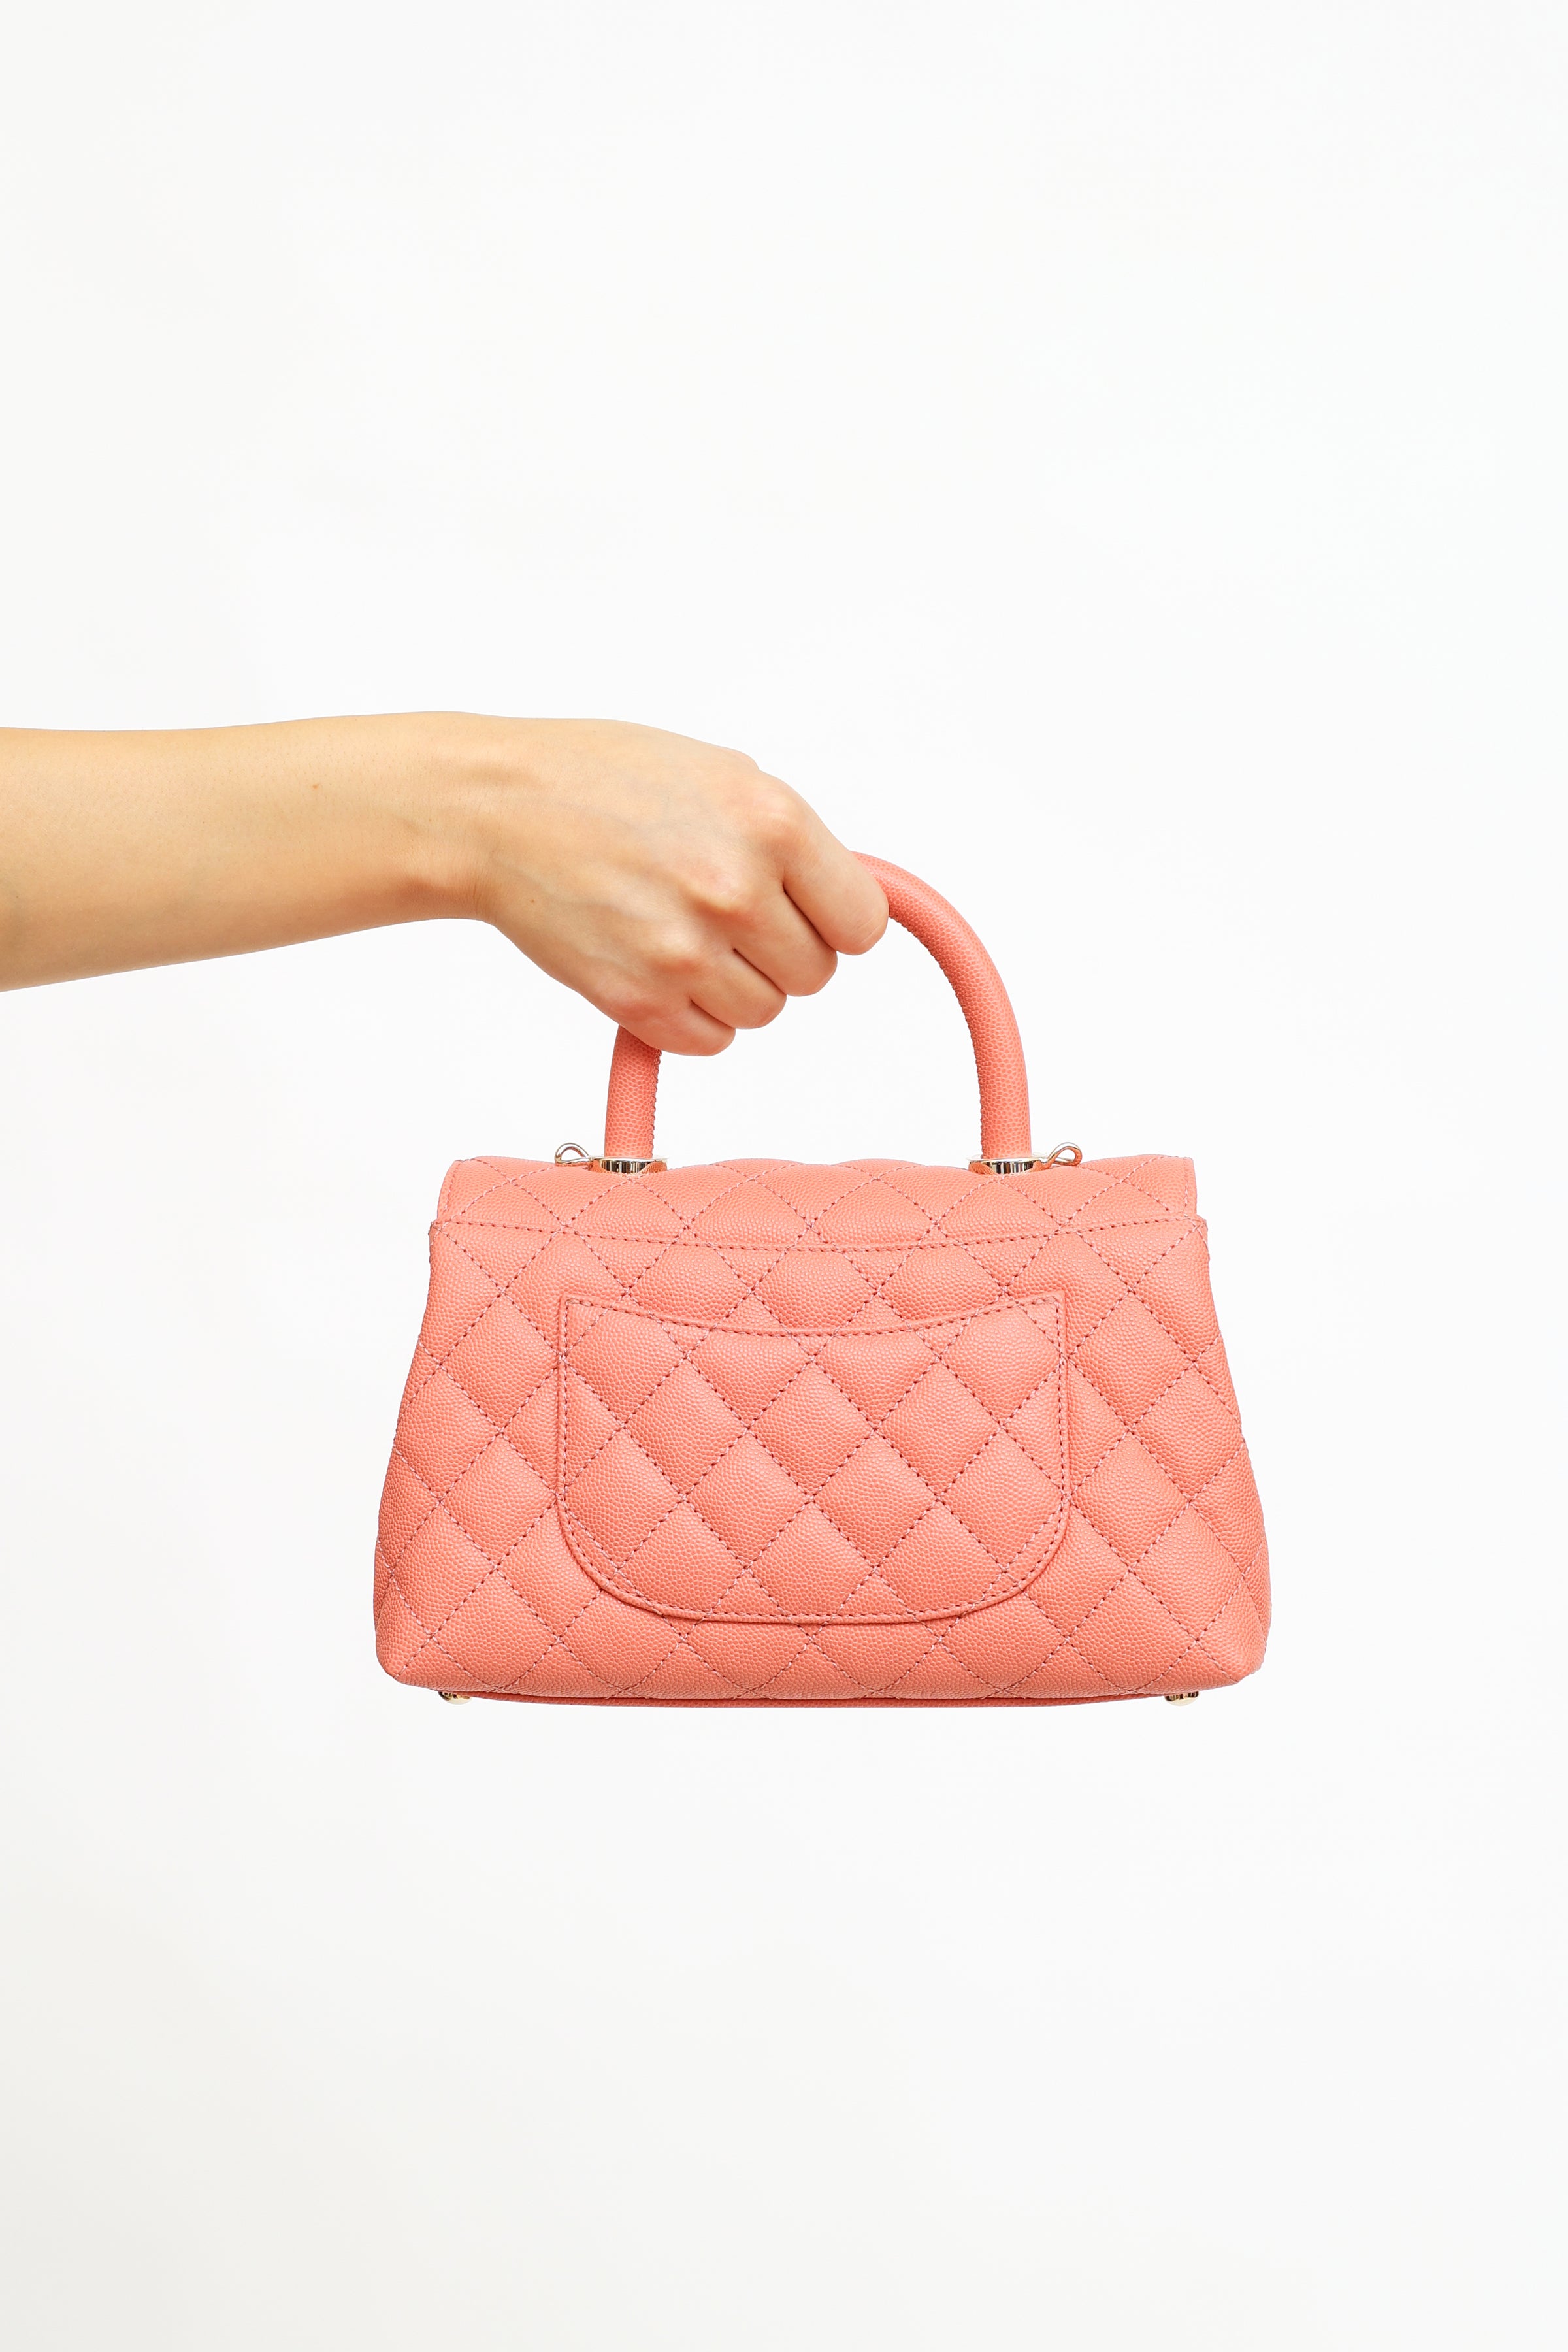 Chanel Classic Mini Rectangular 17C Pink Quilted Caviar with Edge stitching  and light gold hardware